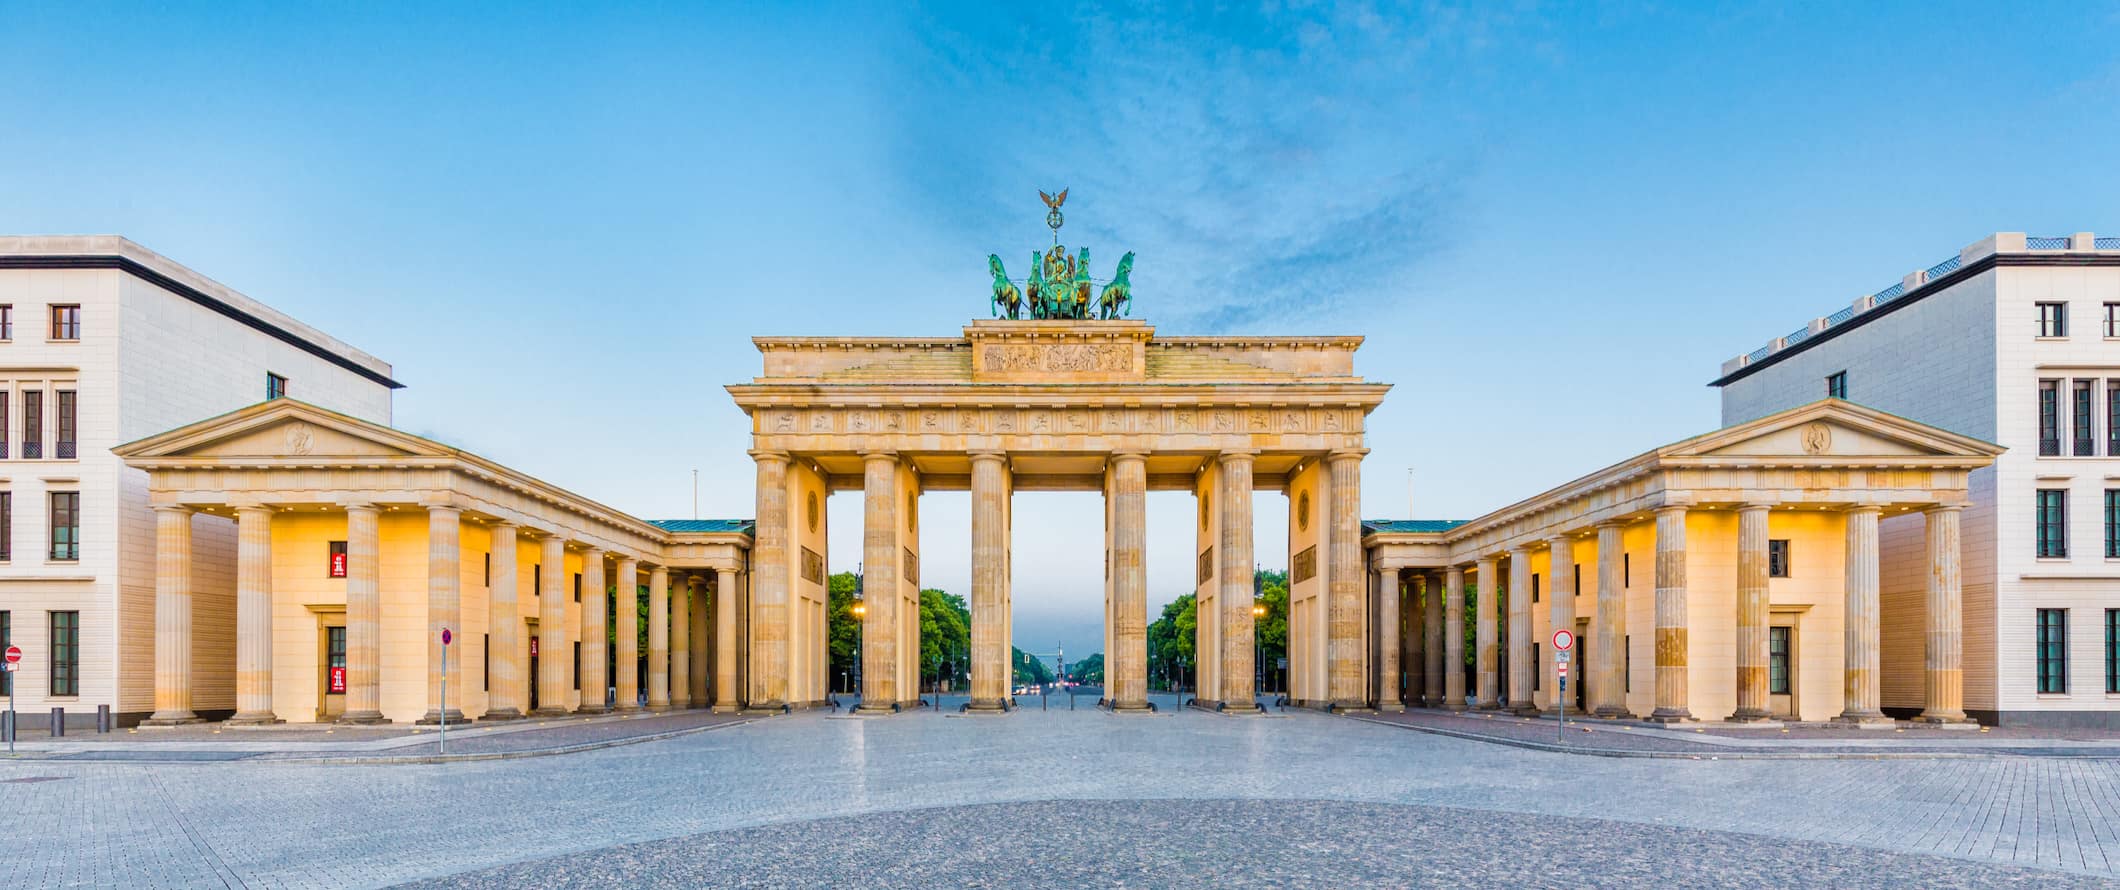 The famous Brandenburg Gate without any people nearby in Berlin, Germany